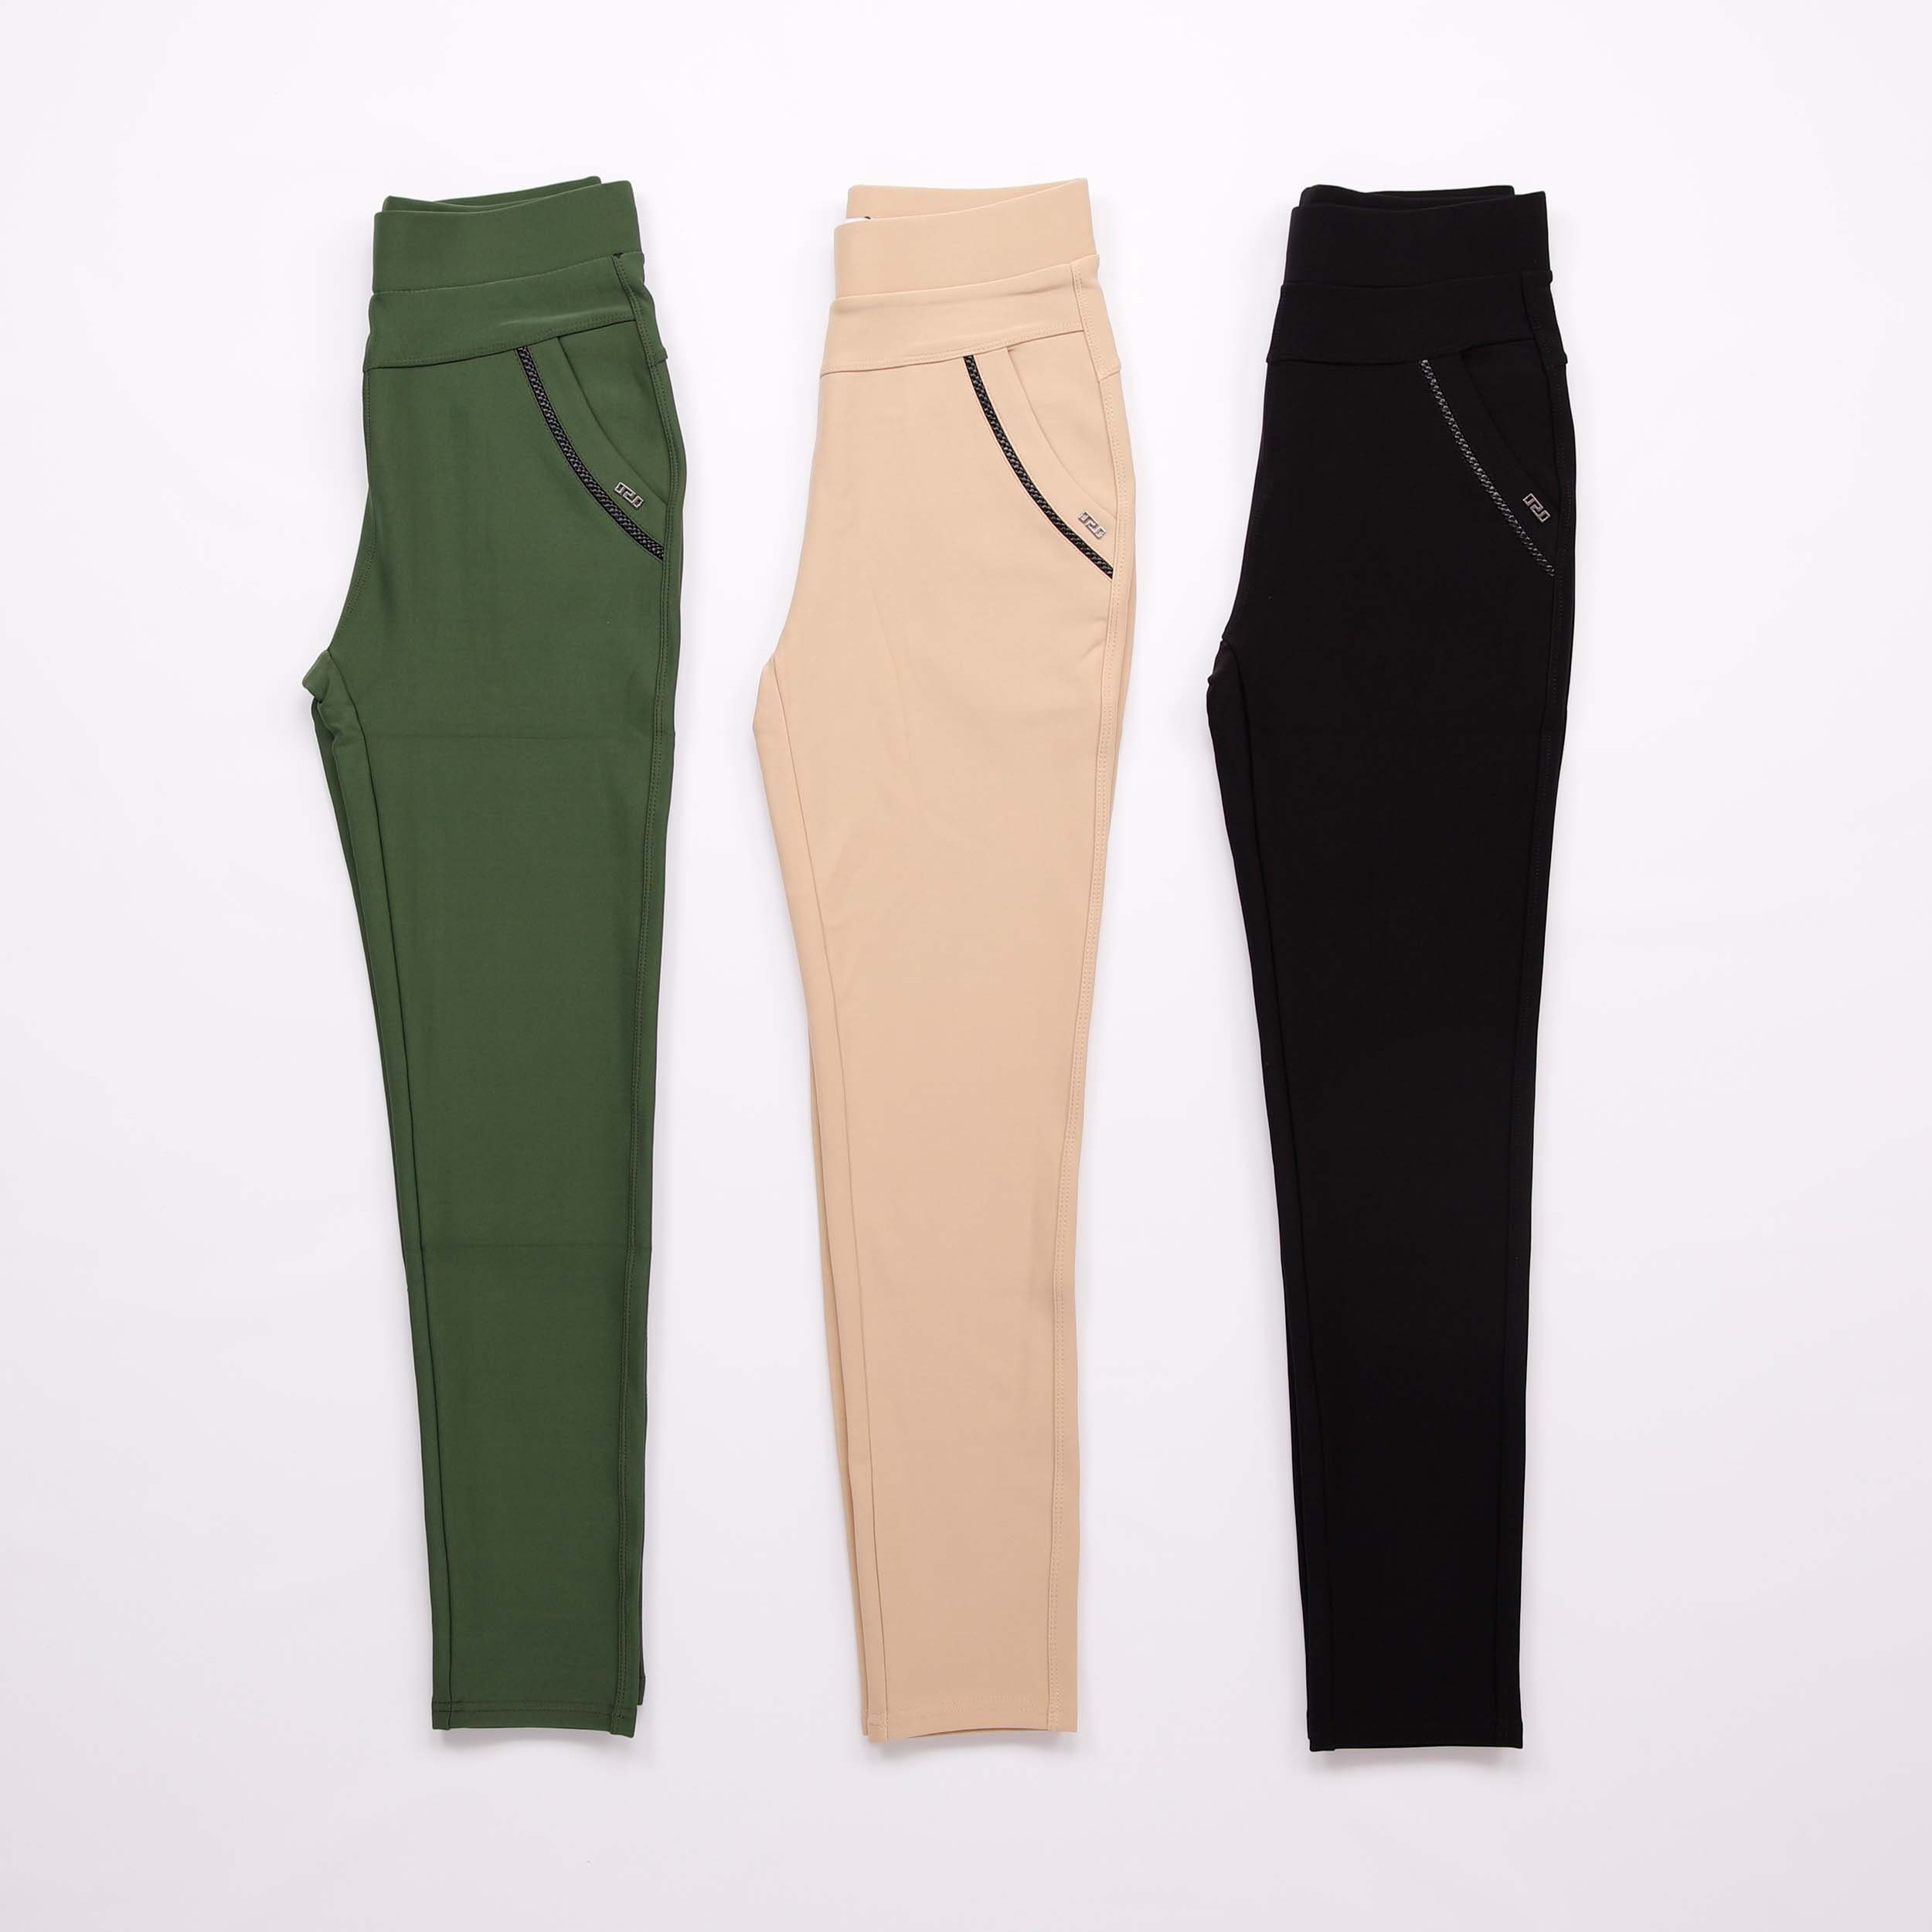 Nordbury Women Trousers Soft Pants Stretch Pull-on Comfy Jeggings Going-out  Italian Bottoms With Pockets for Jogging and Training Workout -  Ireland